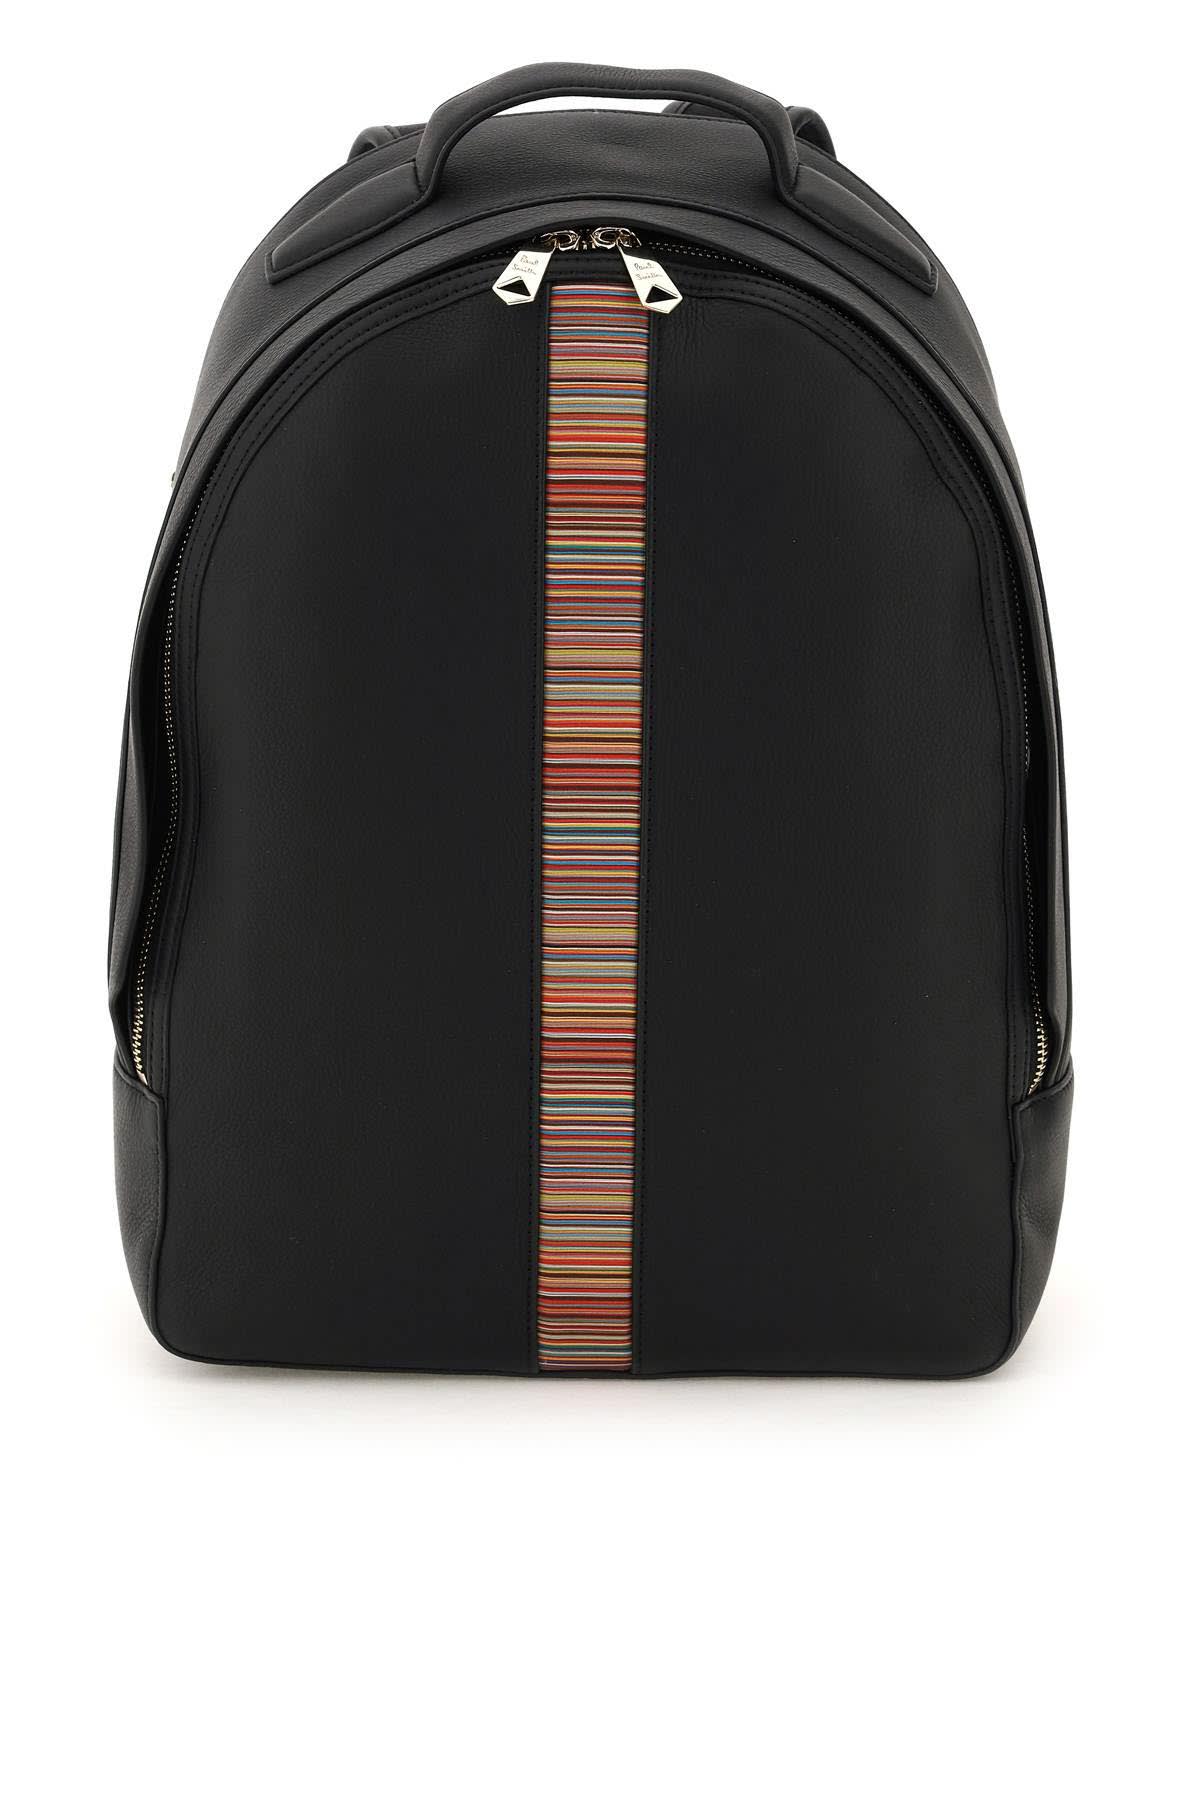 Paul Smith signature Stripe Leather Backpack